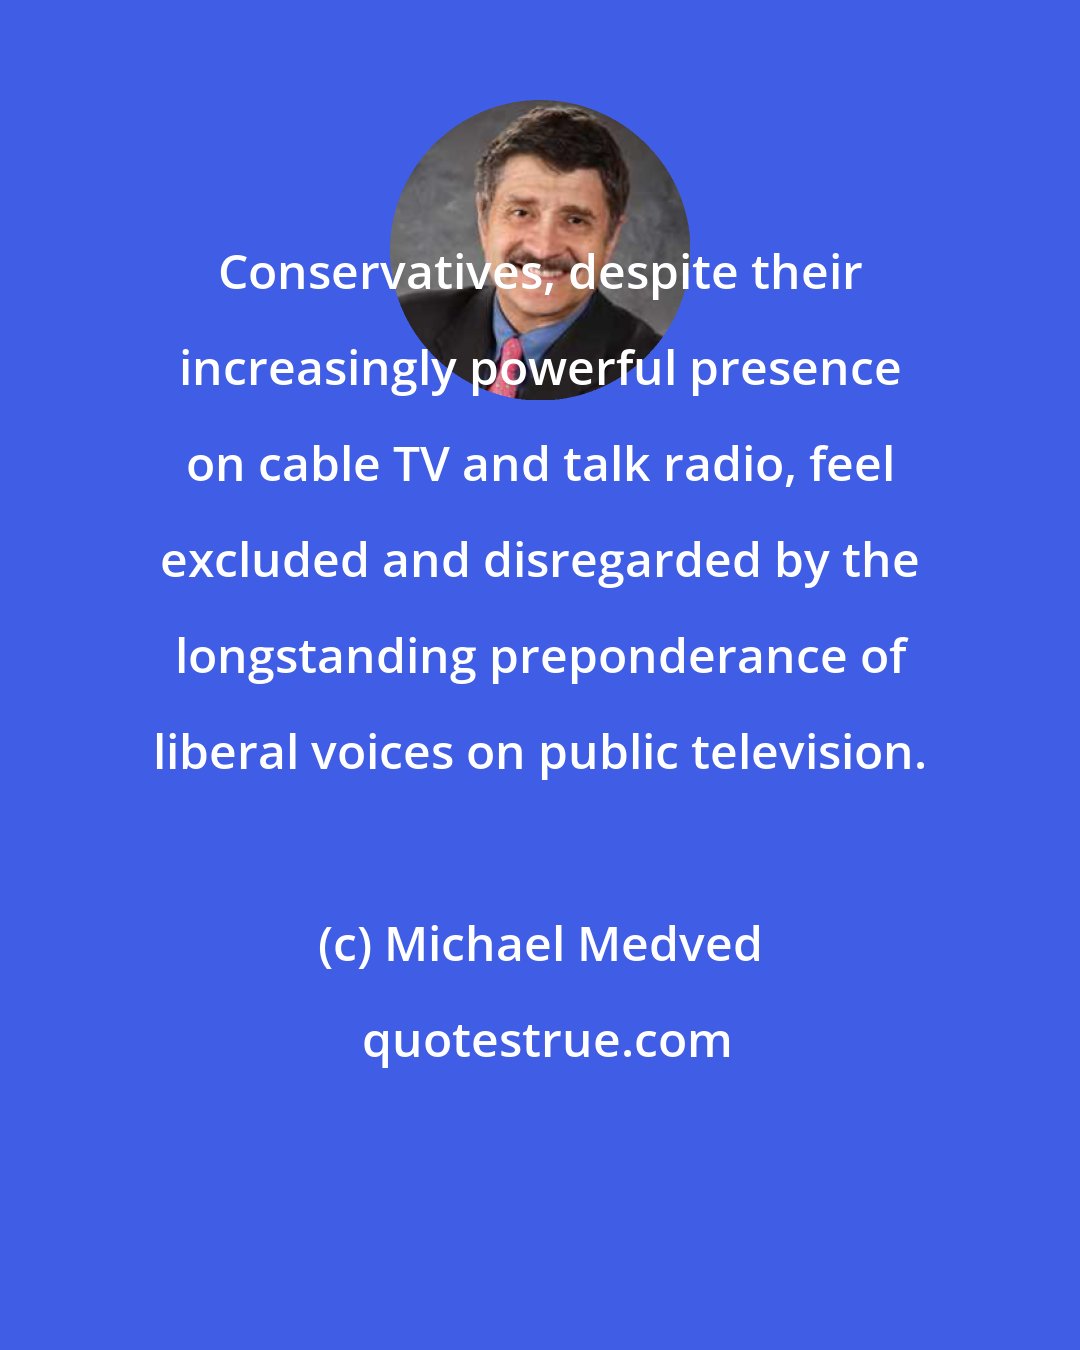 Michael Medved: Conservatives, despite their increasingly powerful presence on cable TV and talk radio, feel excluded and disregarded by the longstanding preponderance of liberal voices on public television.